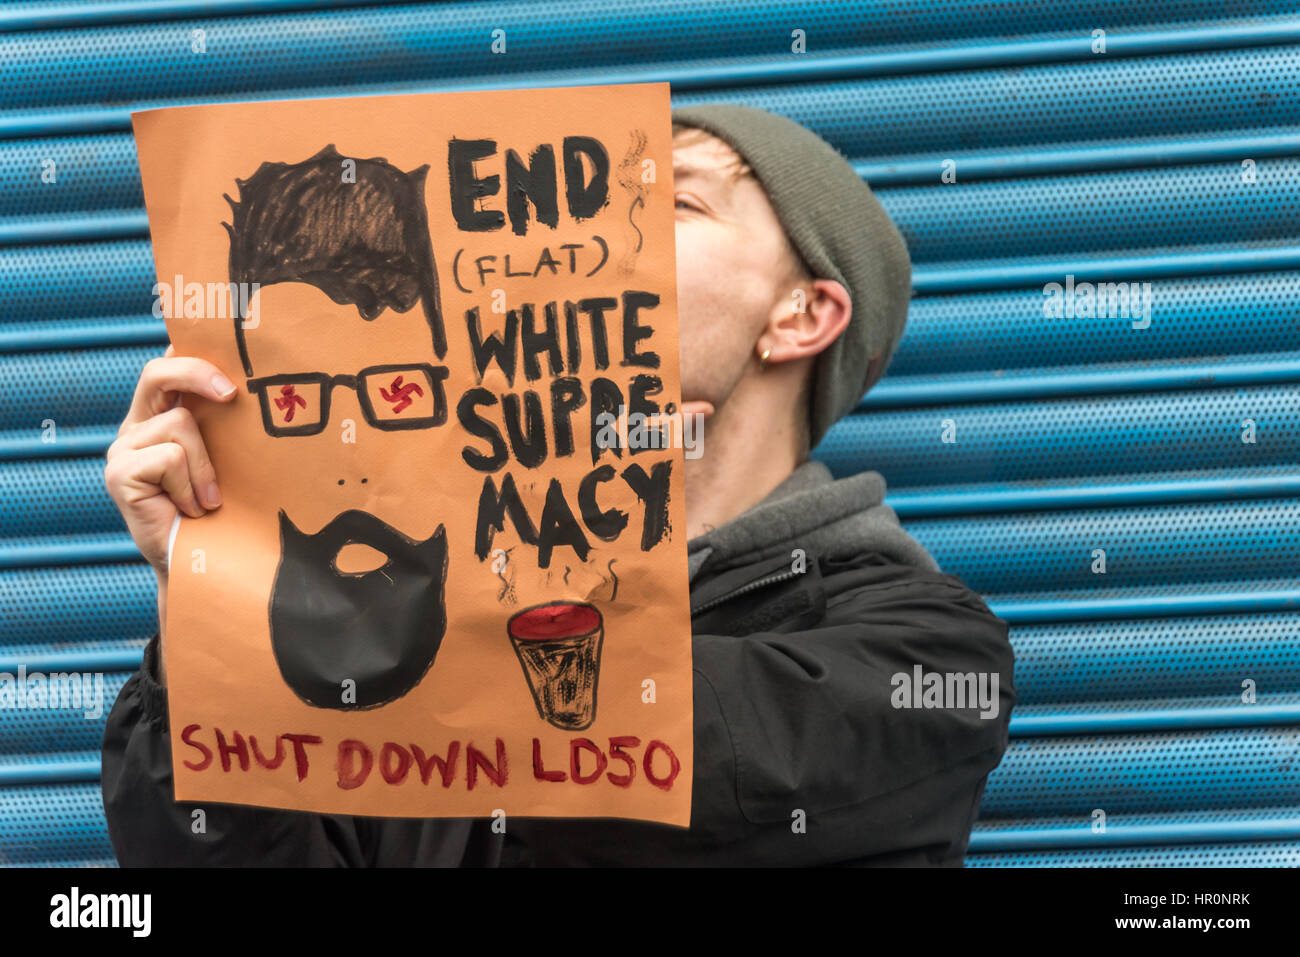 London, UK. 25th February 2017. One of several hundred protesters from East London outside the LD50 gallery in Dalston holds a poster against white supremacist hipsters calling for the LD 50 gallery to be shut down. Protesters say the gallery in one of London's more diverse areas has promoted fascists, neo-Nazis, misogynists, racists and Islamophobes and 'has been responsible for one of the most extensive neo-Nazi cultural programmes to appear in London in the last decade. Credit: Peter Marshall/Alamy Live News Stock Photo